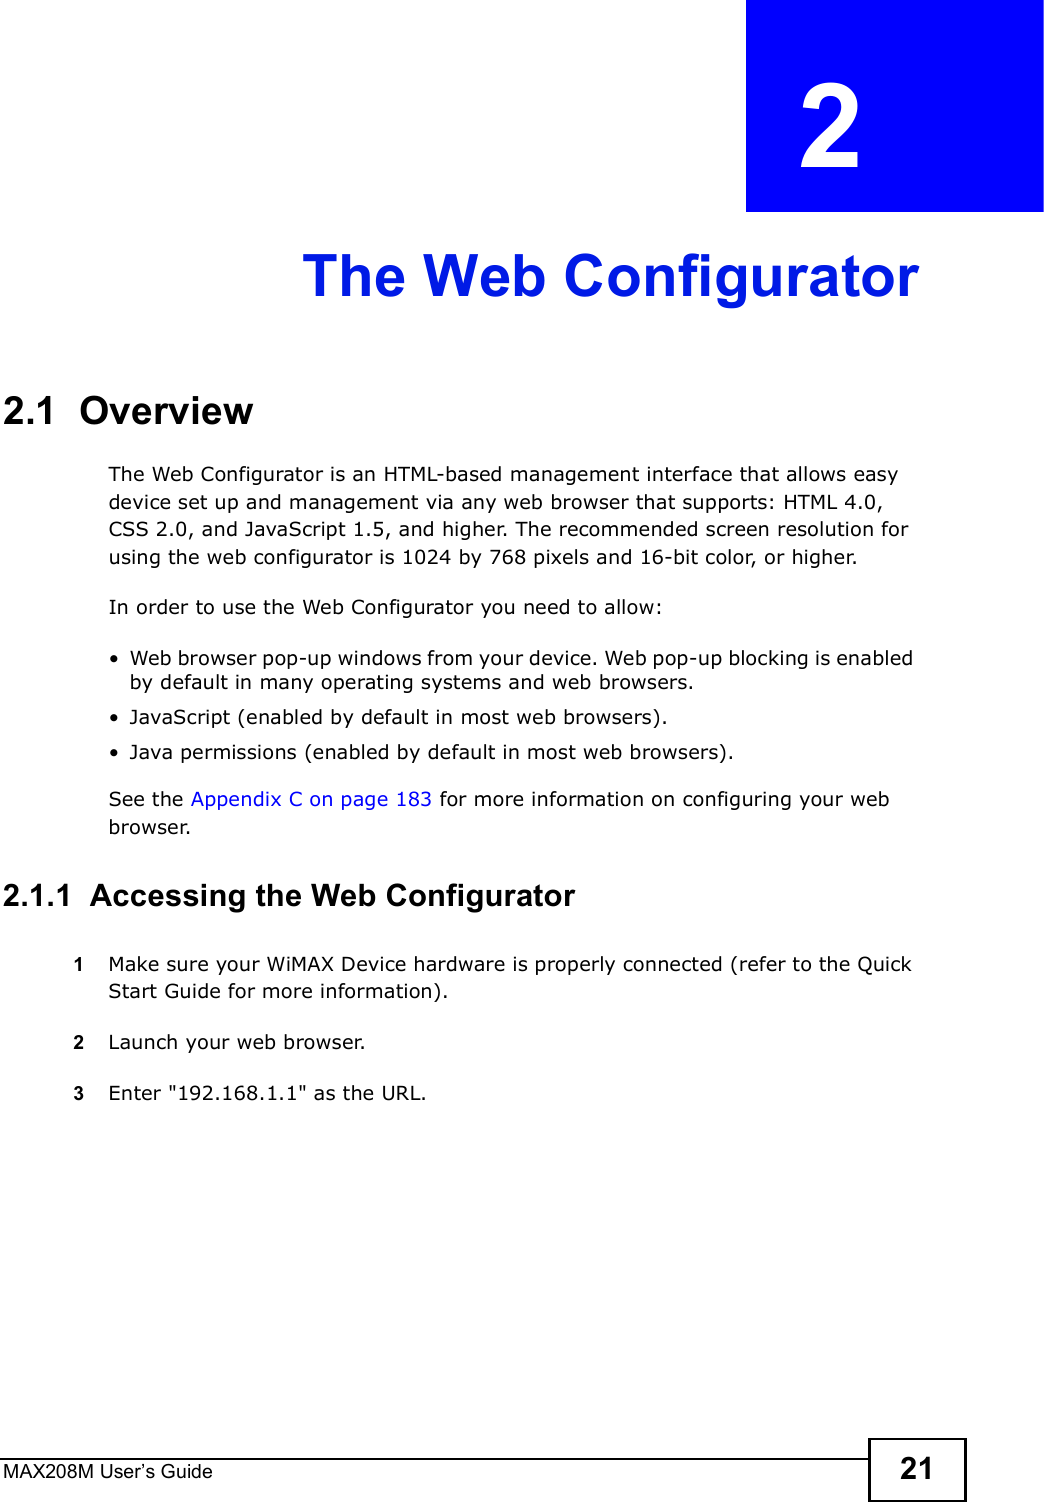 MAX208M User s Guide 21CHAPTER  2 The Web Configurator2.1  OverviewThe Web Configurator is an HTML-based management interface that allows easy device set up and management via any web browser that supports: HTML 4.0, CSS 2.0, and JavaScript 1.5, and higher. The recommended screen resolution for using the web configurator is 1024 by 768 pixels and 16-bit color, or higher.In order to use the Web Configurator you need to allow:!Web browser pop-up windows from your device. Web pop-up blocking is enabled by default in many operating systems and web browsers.!JavaScript (enabled by default in most web browsers).!Java permissions (enabled by default in most web browsers).See the Appendix C on page 183 for more information on configuring your web browser.2.1.1  Accessing the Web Configurator1Make sure your WiMAX Device hardware is properly connected (refer to the Quick Start Guide for more information).2Launch your web browser.3Enter &quot;192.168.1.1&quot; as the URL.